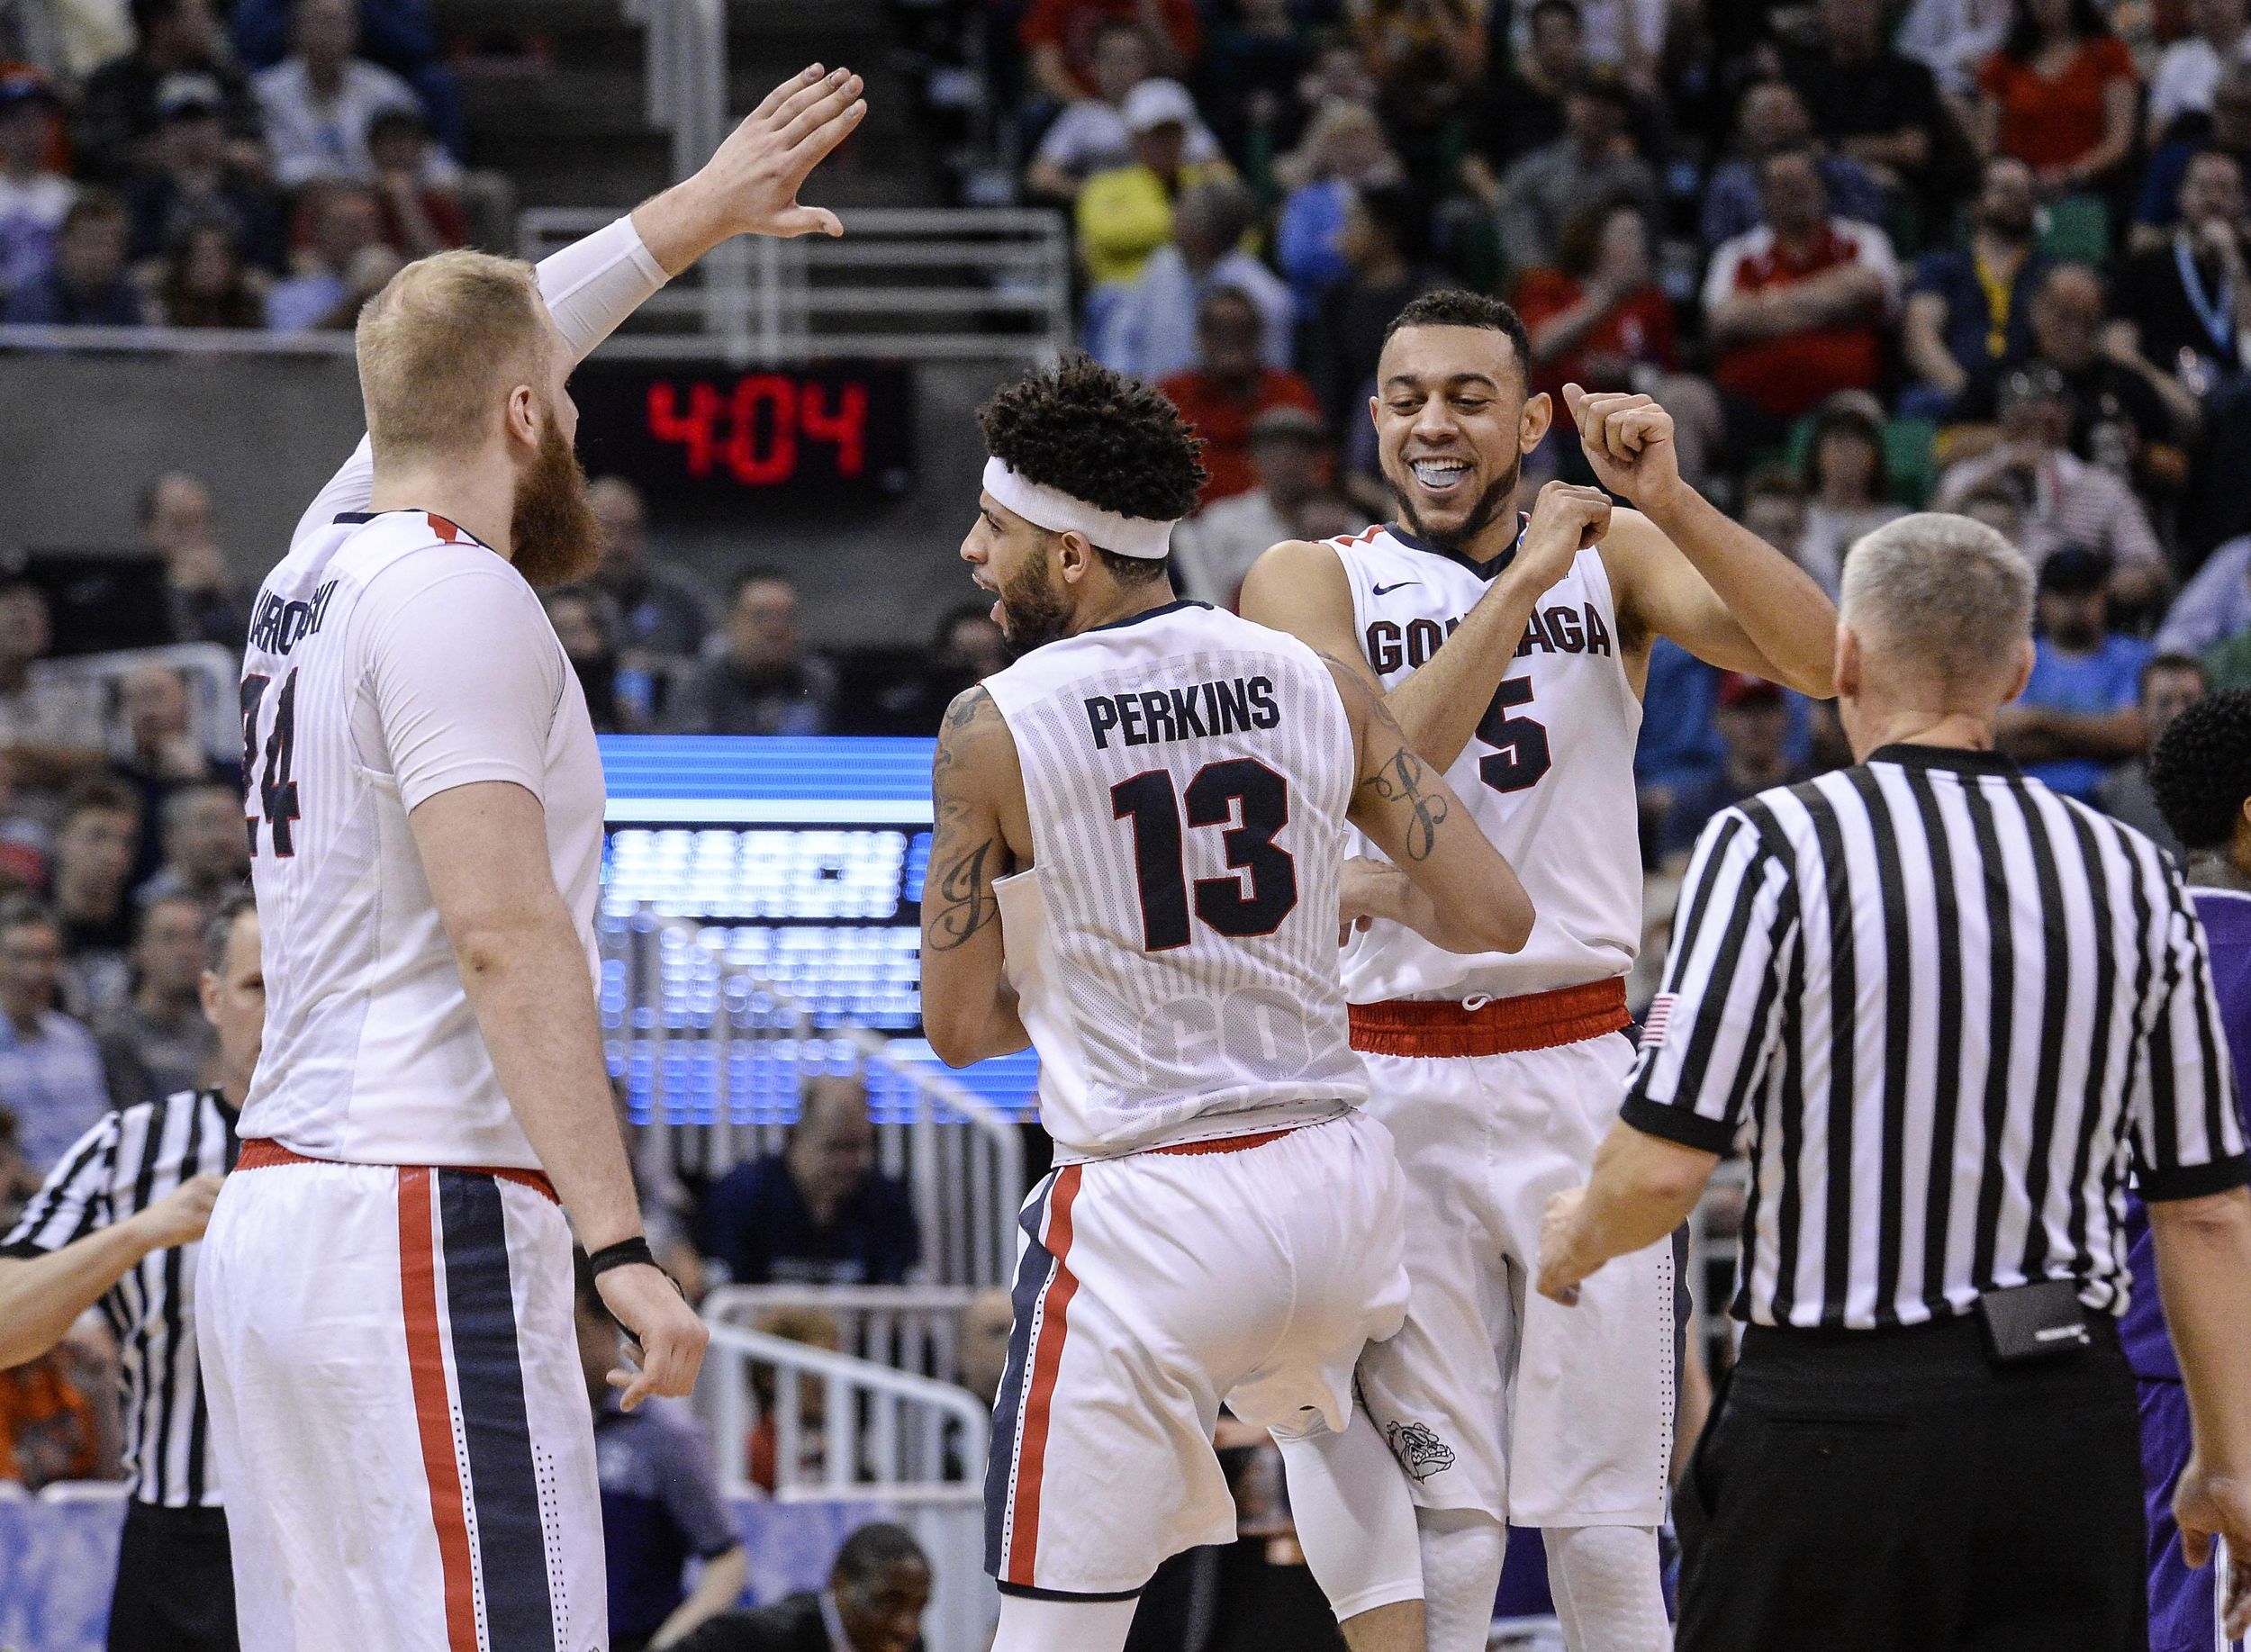 John Blanchette: There is no shortage of memorable Gonzaga moments